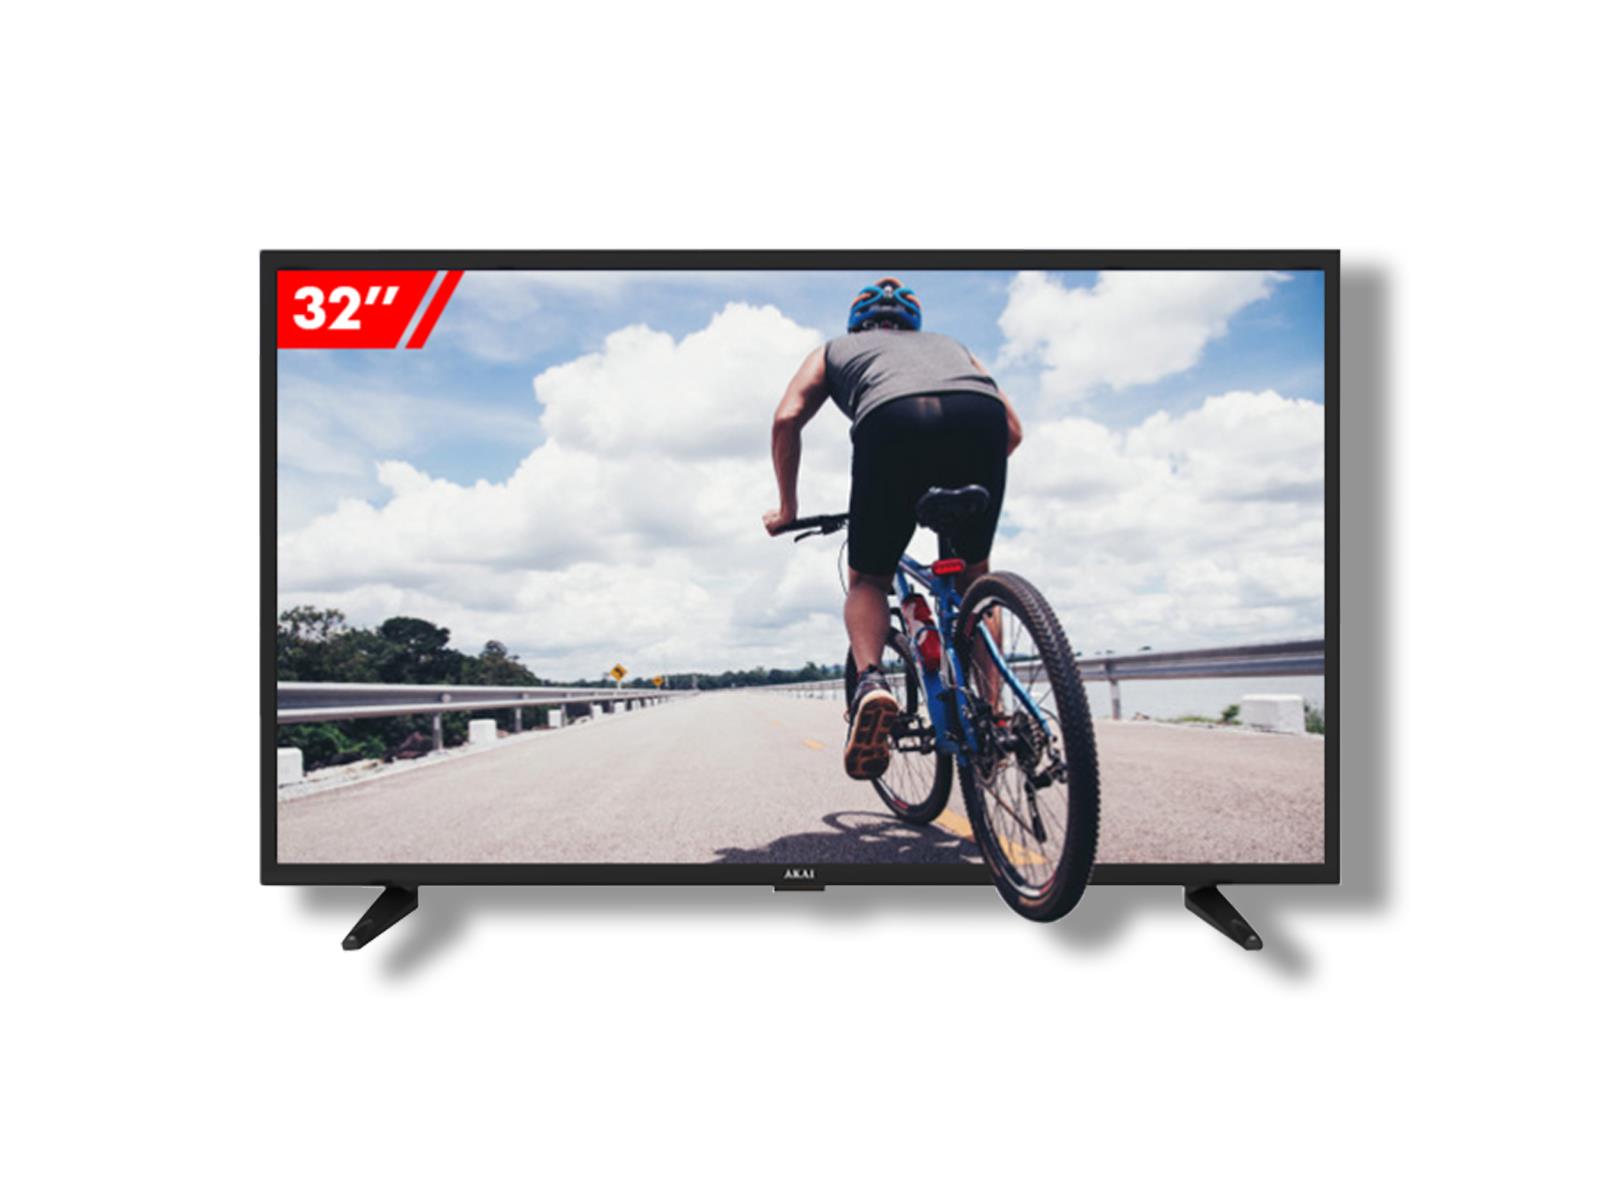 Akai 32 Inch Tv Front View Showing 32 inch Size